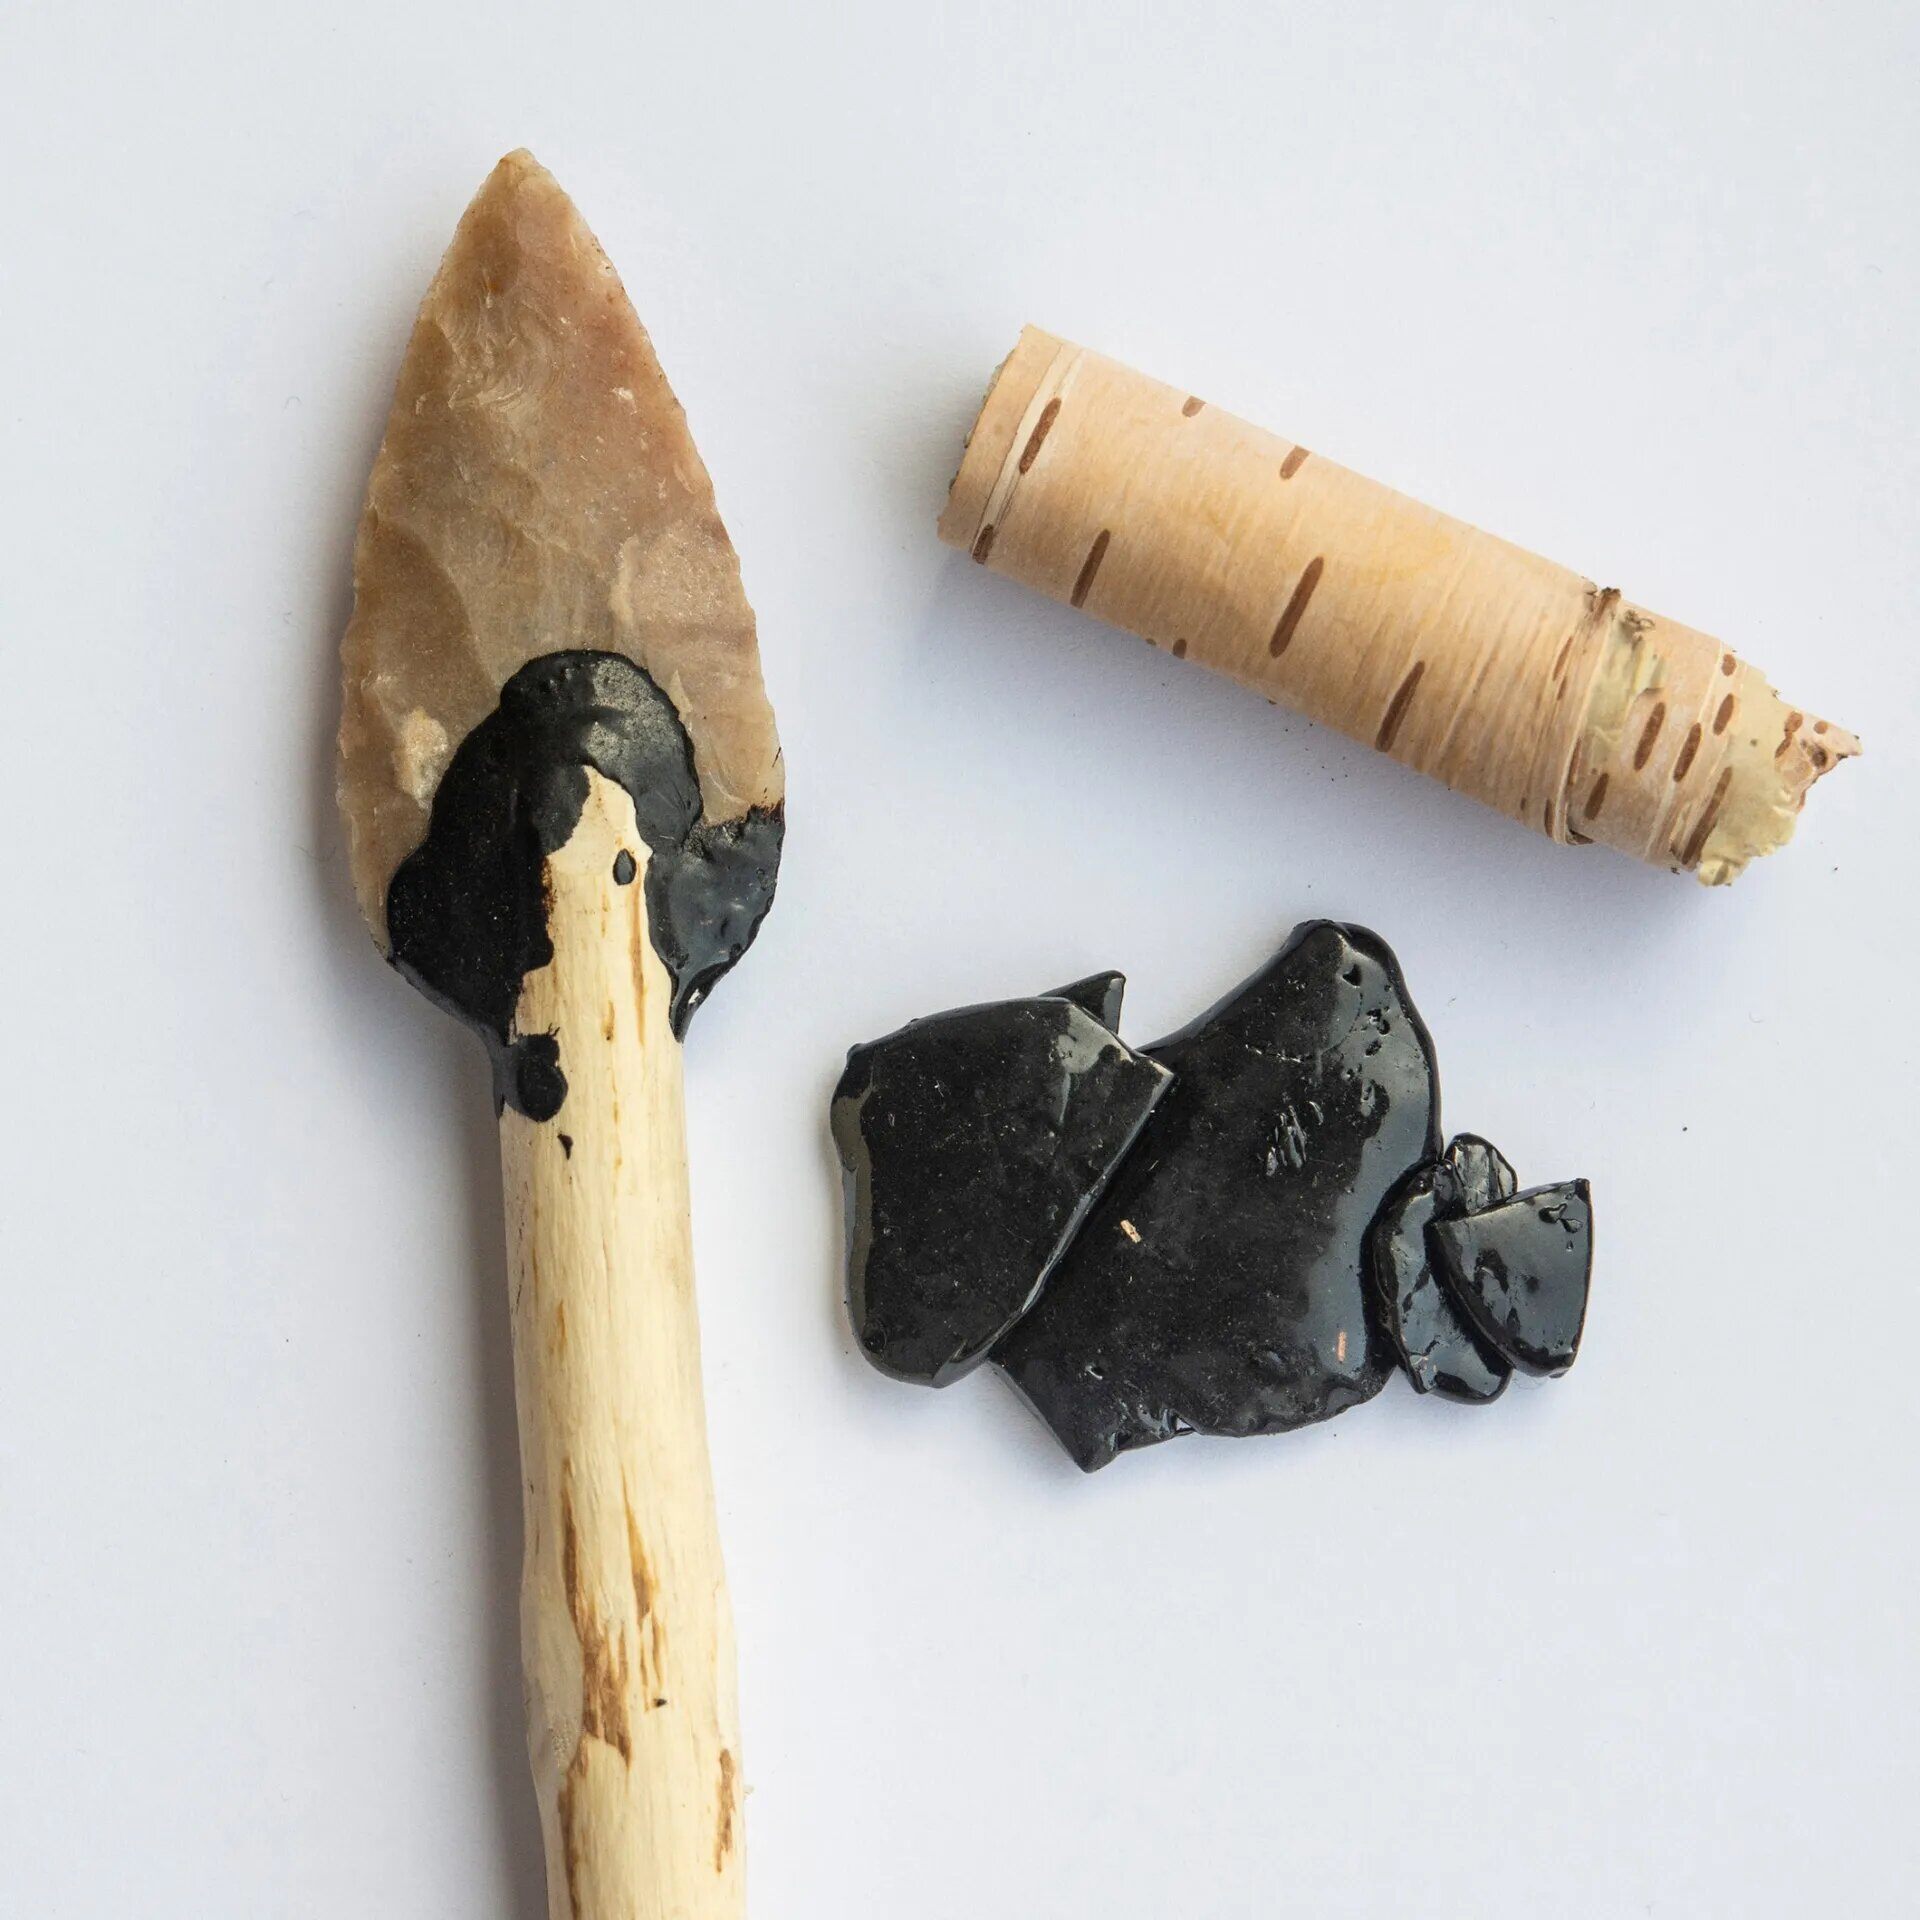 Early glue used for prehistoric tools